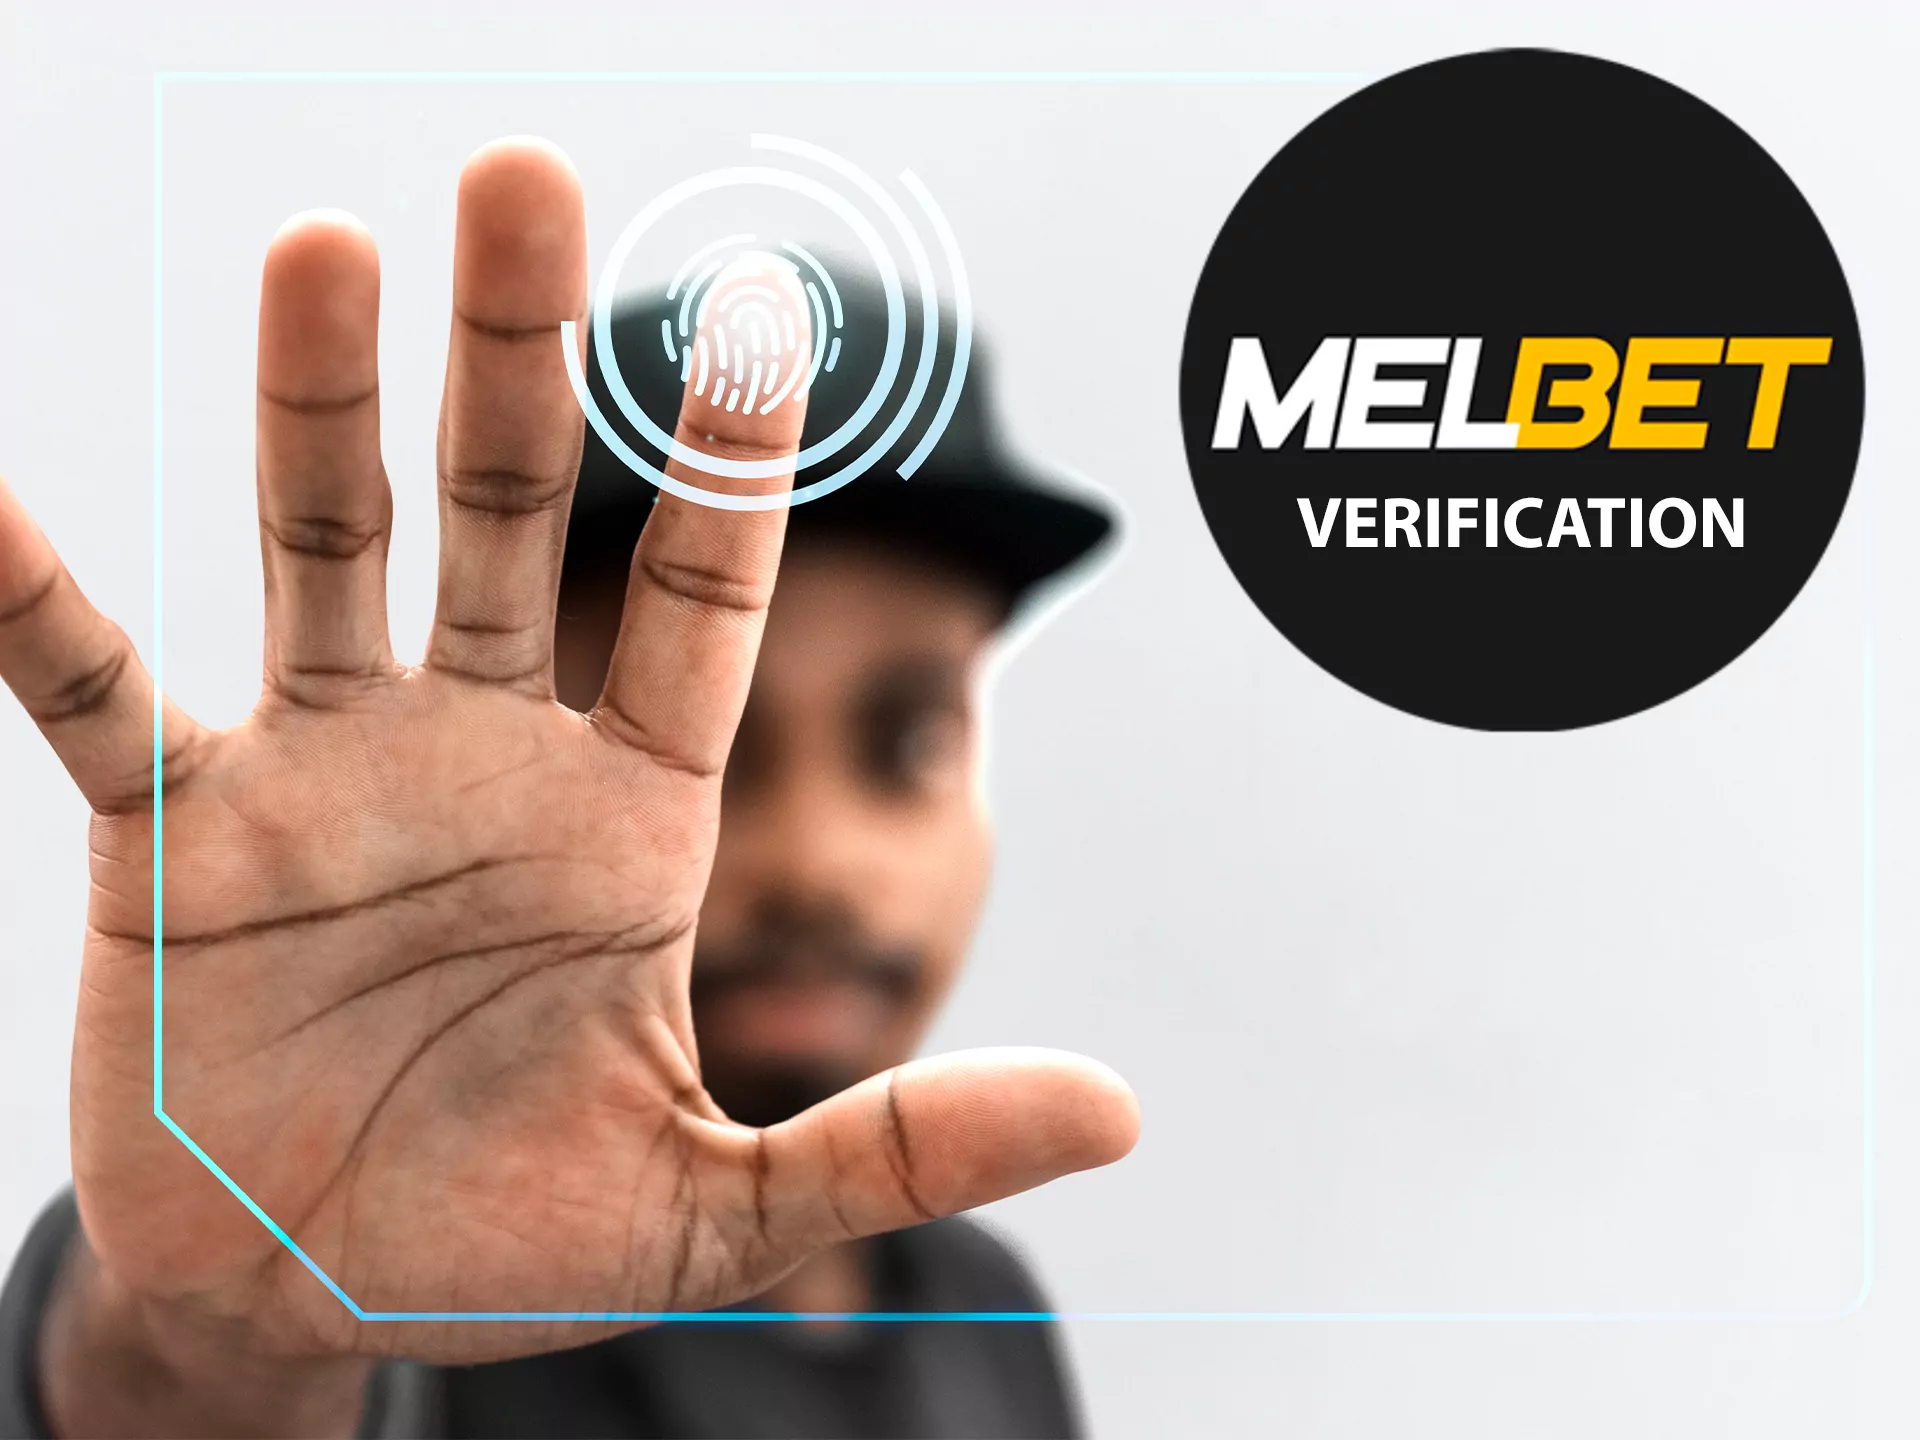 Do not try to cheat on Melbet team because it can lead to ban of your account.